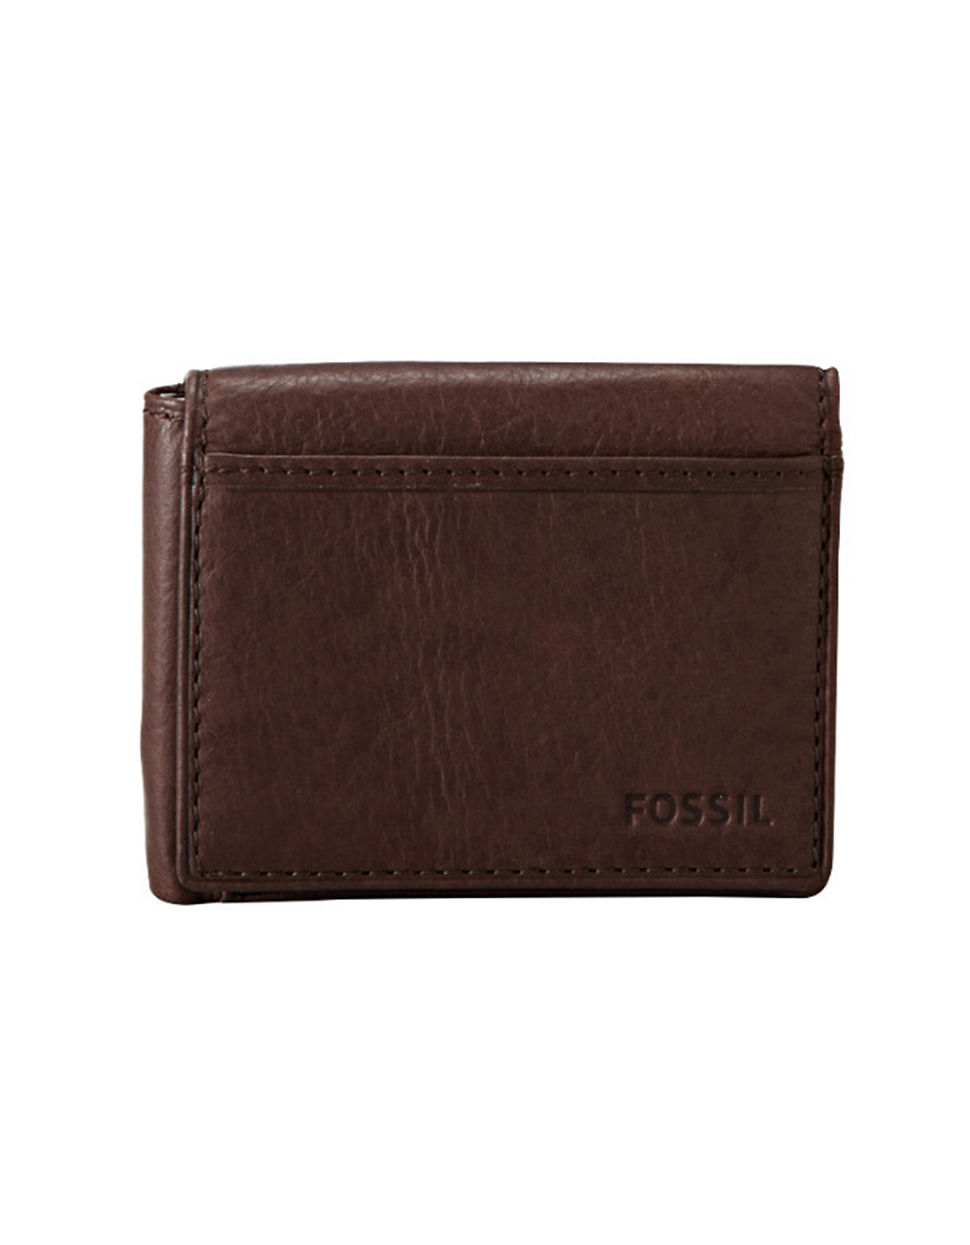 Fossil Ingram Execufold Leather Wallet in Brown for Men | Lyst